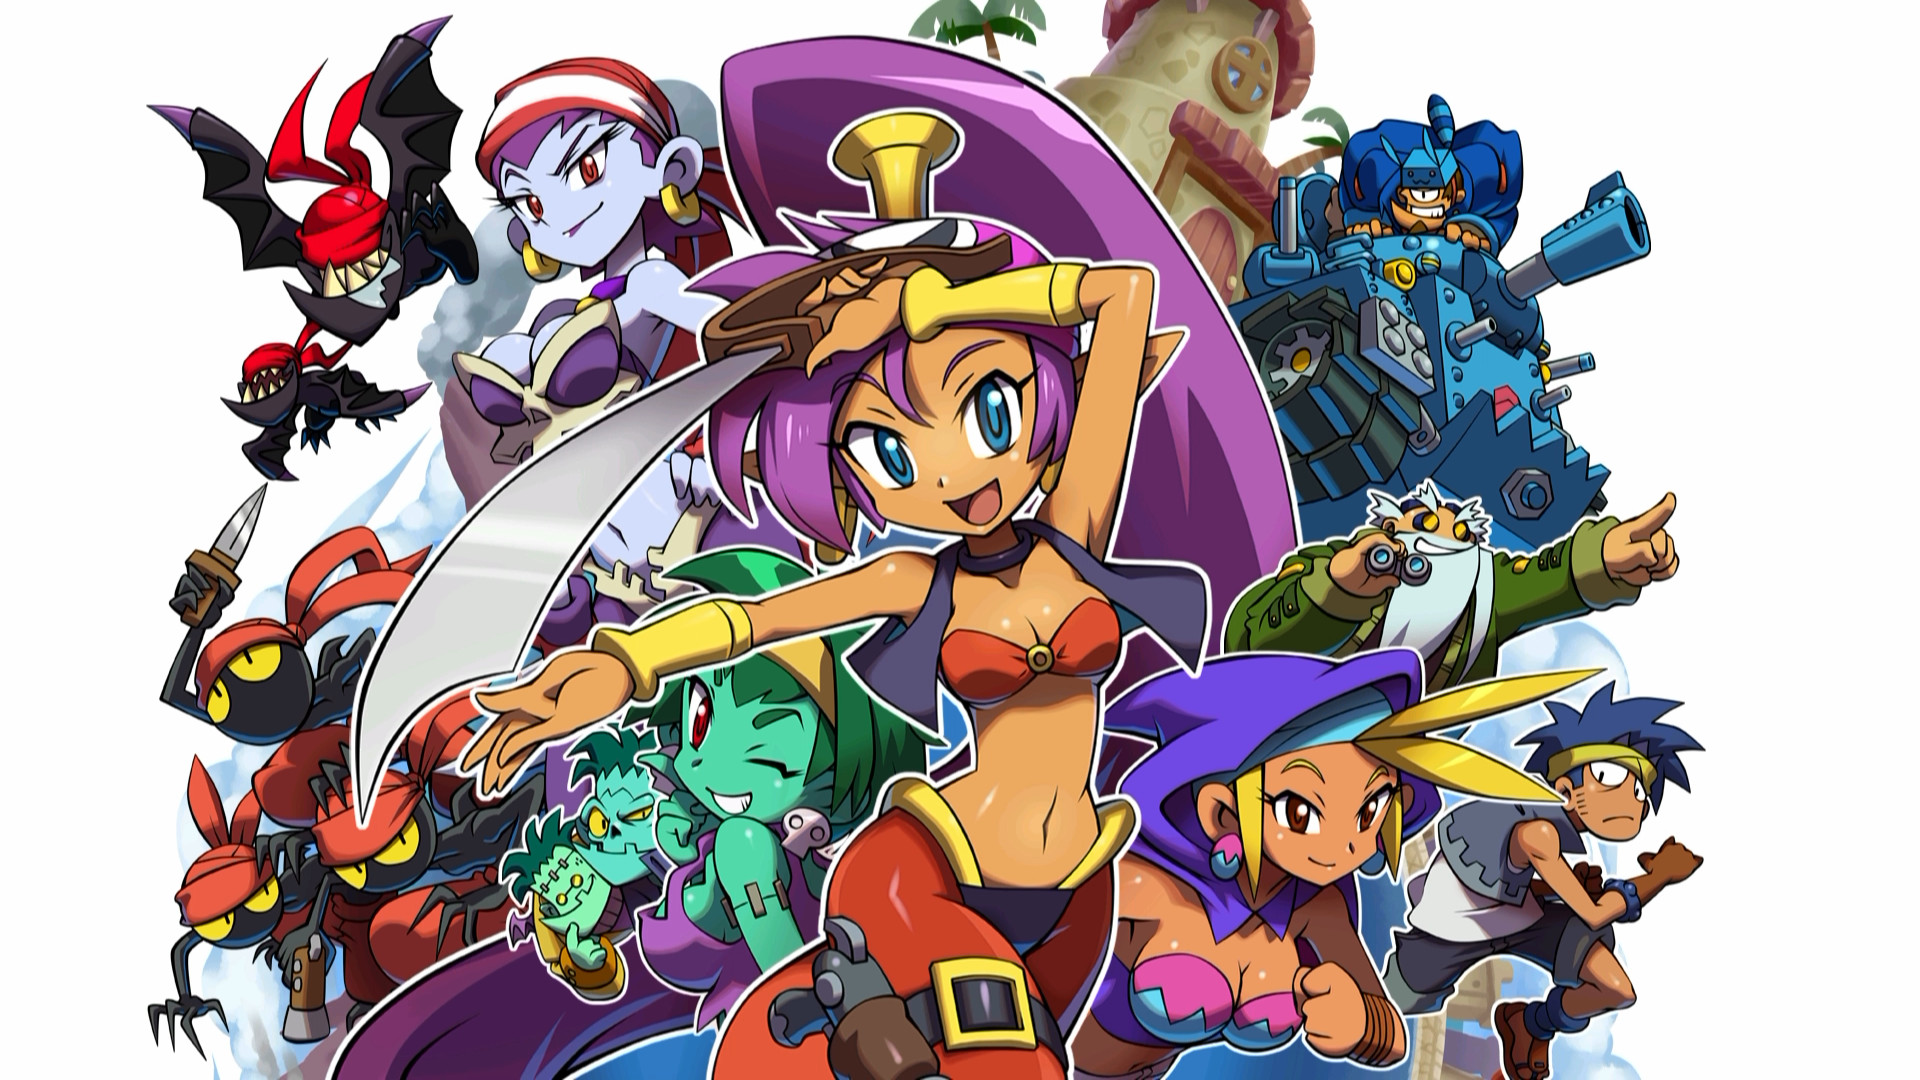 Shantae and the Pirate's Curse Wallpaper - Normal